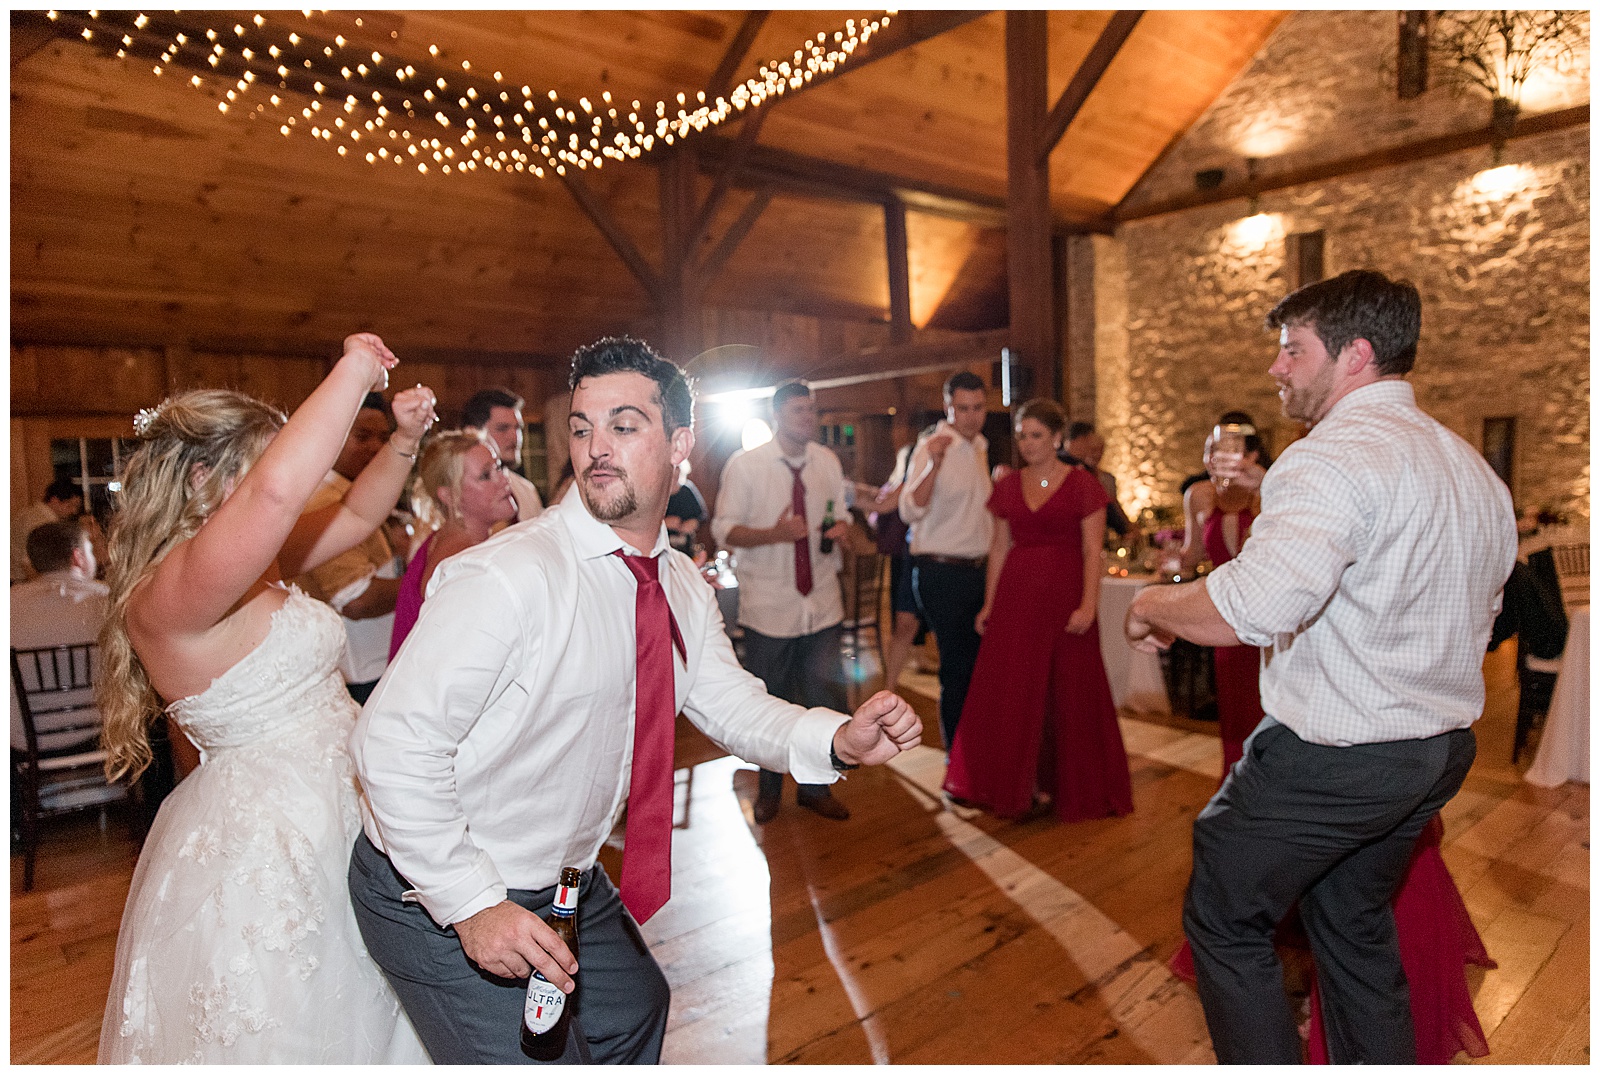 groom and bride dancing the night away during reception along with their guests at the barn at silverstone